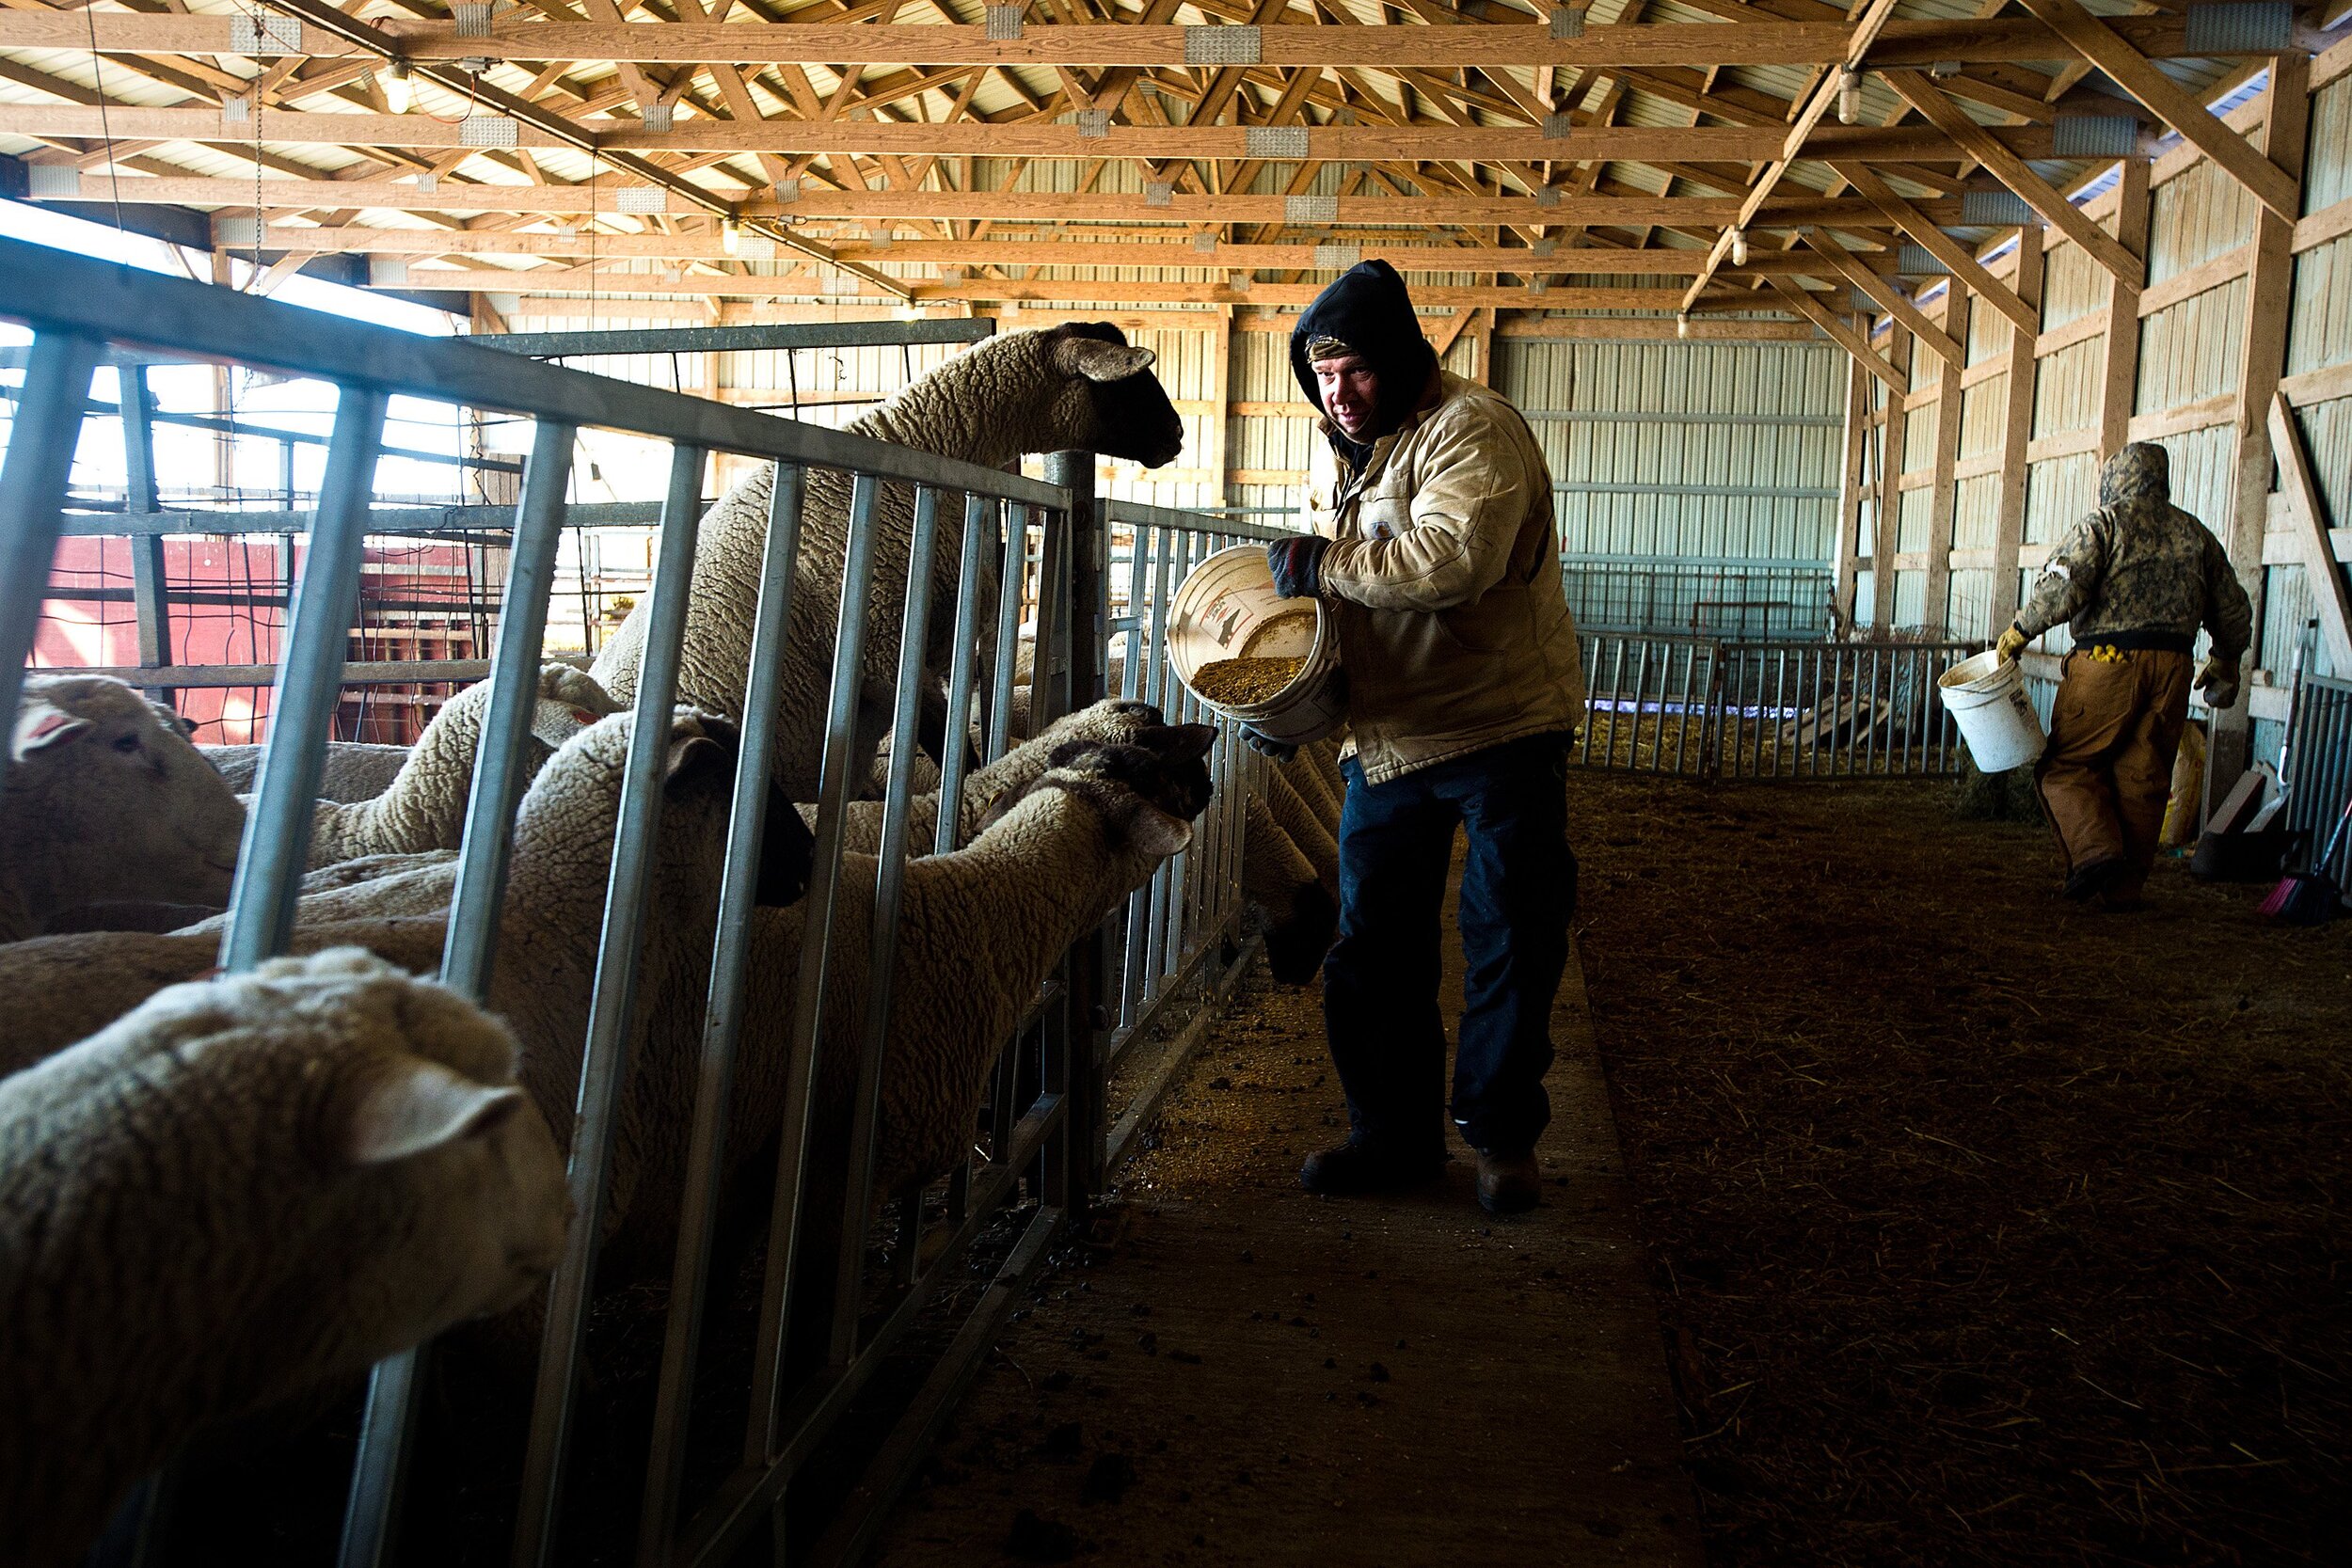  Illinois State University Farm manager Jason Lindbom, center, and farm foreman Jeff Bender feed a flock of sheep Wednesday, Jan. 30, 2019, at the farm near Lexington, Illinois. On a day when a record-low temperature of minus 21 degrees was recorded 